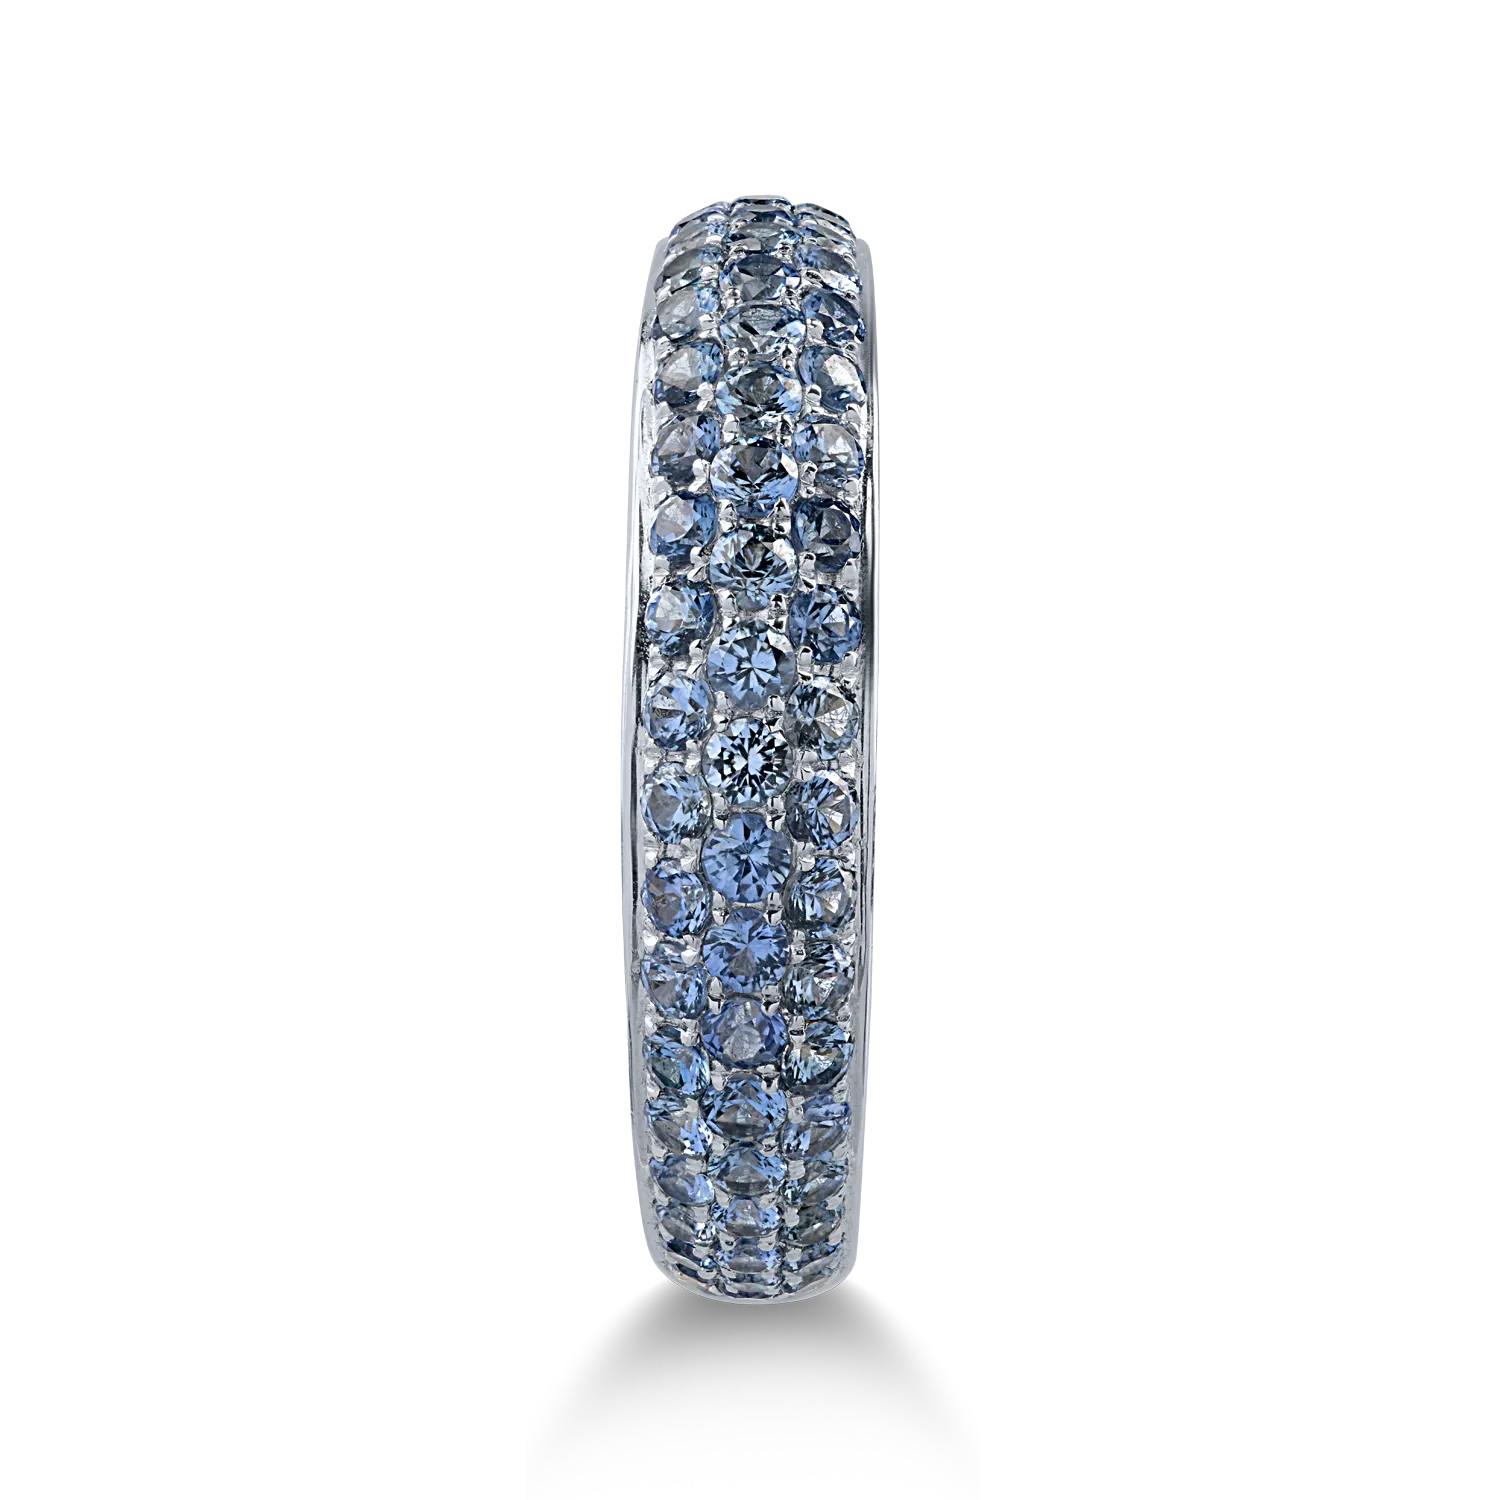 Half eternity ring in white gold with 1.13ct blue sapphires